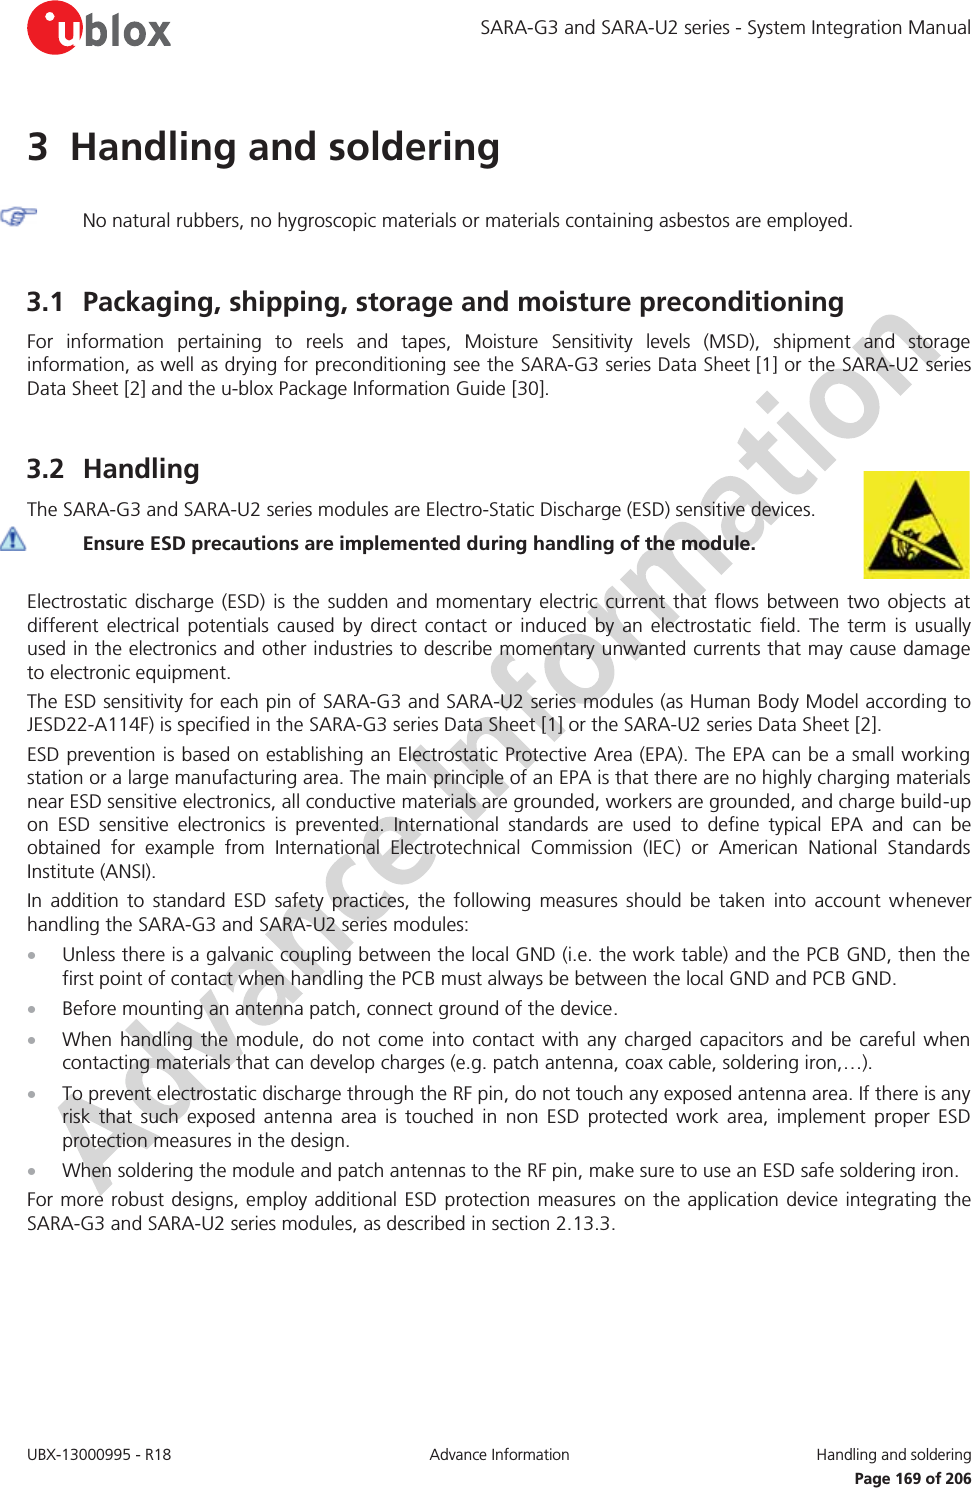 SARA-G3 and SARA-U2 series - System Integration Manual UBX-13000995 - R18  Advance Information  Handling and soldering   Page 169 of 206 3 Handling and soldering   No natural rubbers, no hygroscopic materials or materials containing asbestos are employed.  3.1 Packaging, shipping, storage and moisture preconditioning For information pertaining to reels and tapes, Moisture Sensitivity levels (MSD), shipment and storage information, as well as drying for preconditioning see the SARA-G3 series Data Sheet [1] or the SARA-U2 series Data Sheet [2] and the u-blox Package Information Guide [30].  3.2 Handling The SARA-G3 and SARA-U2 series modules are Electro-Static Discharge (ESD) sensitive devices.  Ensure ESD precautions are implemented during handling of the module.  Electrostatic discharge (ESD) is the sudden and momentary electric current that flows between two objects at different electrical potentials caused by direct contact or induced by an electrostatic field. The term is usually used in the electronics and other industries to describe momentary unwanted currents that may cause damage to electronic equipment. The ESD sensitivity for each pin of SARA-G3 and SARA-U2 series modules (as Human Body Model according to JESD22-A114F) is specified in the SARA-G3 series Data Sheet [1] or the SARA-U2 series Data Sheet [2]. ESD prevention is based on establishing an Electrostatic Protective Area (EPA). The EPA can be a small working station or a large manufacturing area. The main principle of an EPA is that there are no highly charging materials near ESD sensitive electronics, all conductive materials are grounded, workers are grounded, and charge build-up on ESD sensitive electronics is prevented. International standards are used to define typical EPA and can be obtained for example from International  Electrotechnical Commission (IEC) or American National Standards Institute (ANSI). In addition to standard ESD safety practices, the following measures should be taken into account whenever handling the SARA-G3 and SARA-U2 series modules: x Unless there is a galvanic coupling between the local GND (i.e. the work table) and the PCB GND, then the first point of contact when handling the PCB must always be between the local GND and PCB GND. x Before mounting an antenna patch, connect ground of the device. x When handling the module, do not come into contact with any charged capacitors and be careful when contacting materials that can develop charges (e.g. patch antenna, coax cable, soldering iron,…). x To prevent electrostatic discharge through the RF pin, do not touch any exposed antenna area. If there is any risk that such exposed antenna area is touched in non ESD protected work area, implement proper ESD protection measures in the design. x When soldering the module and patch antennas to the RF pin, make sure to use an ESD safe soldering iron. For more robust designs, employ additional ESD protection measures on the application device integrating the SARA-G3 and SARA-U2 series modules, as described in section 2.13.3.  